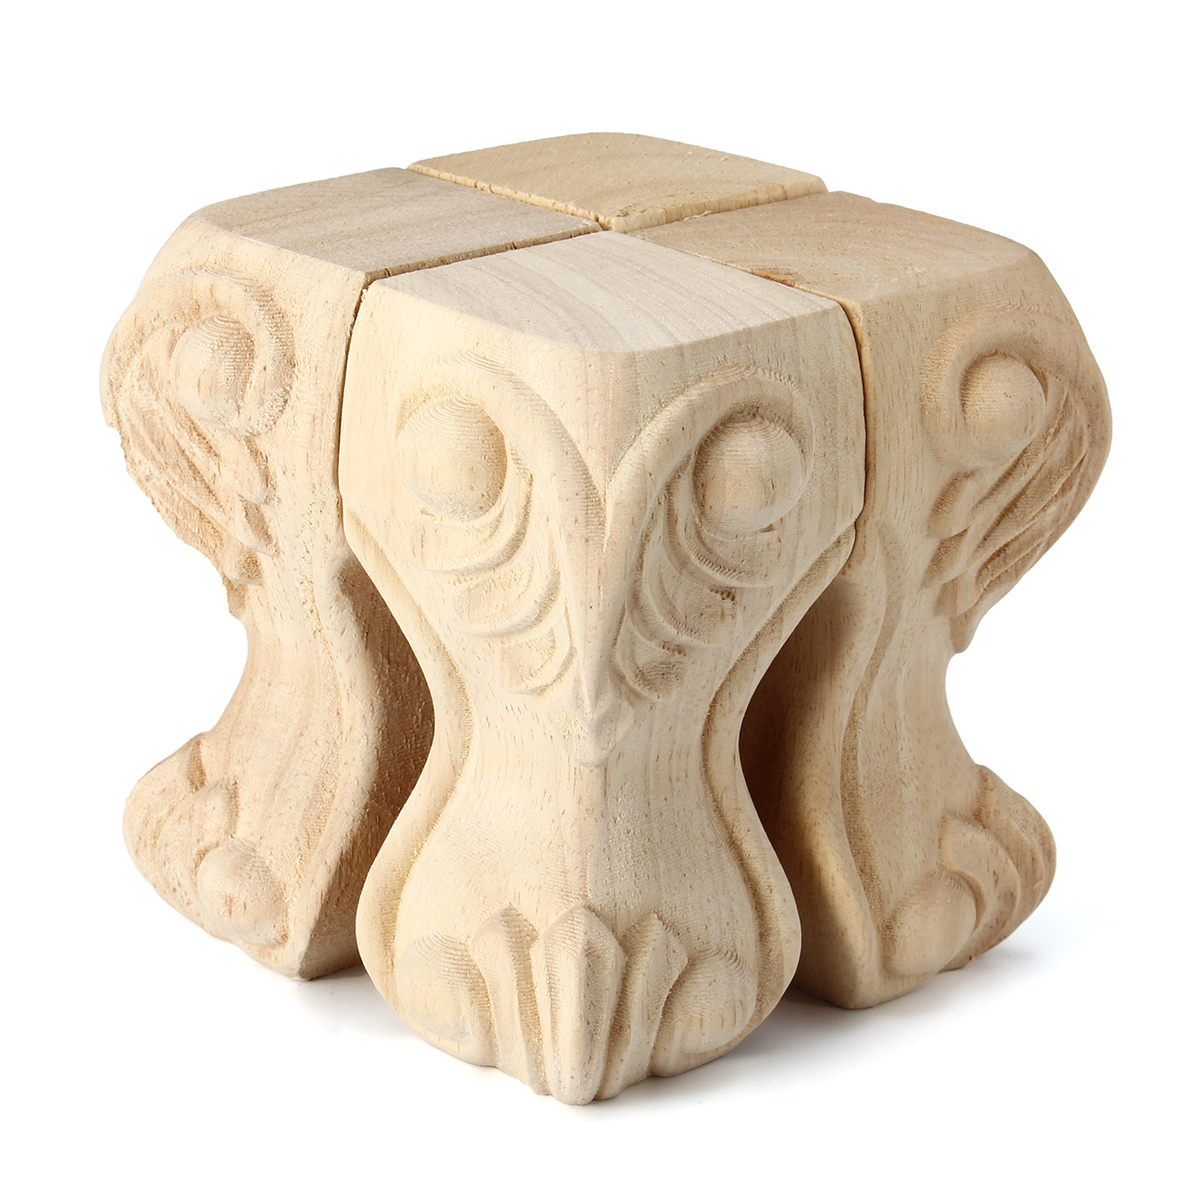 4Pcs-1015cm-European-Solid-Wood-Carving-Furniture-Foot-Legs-Unpainted-Table-Cabinet-Feets-1322663-3